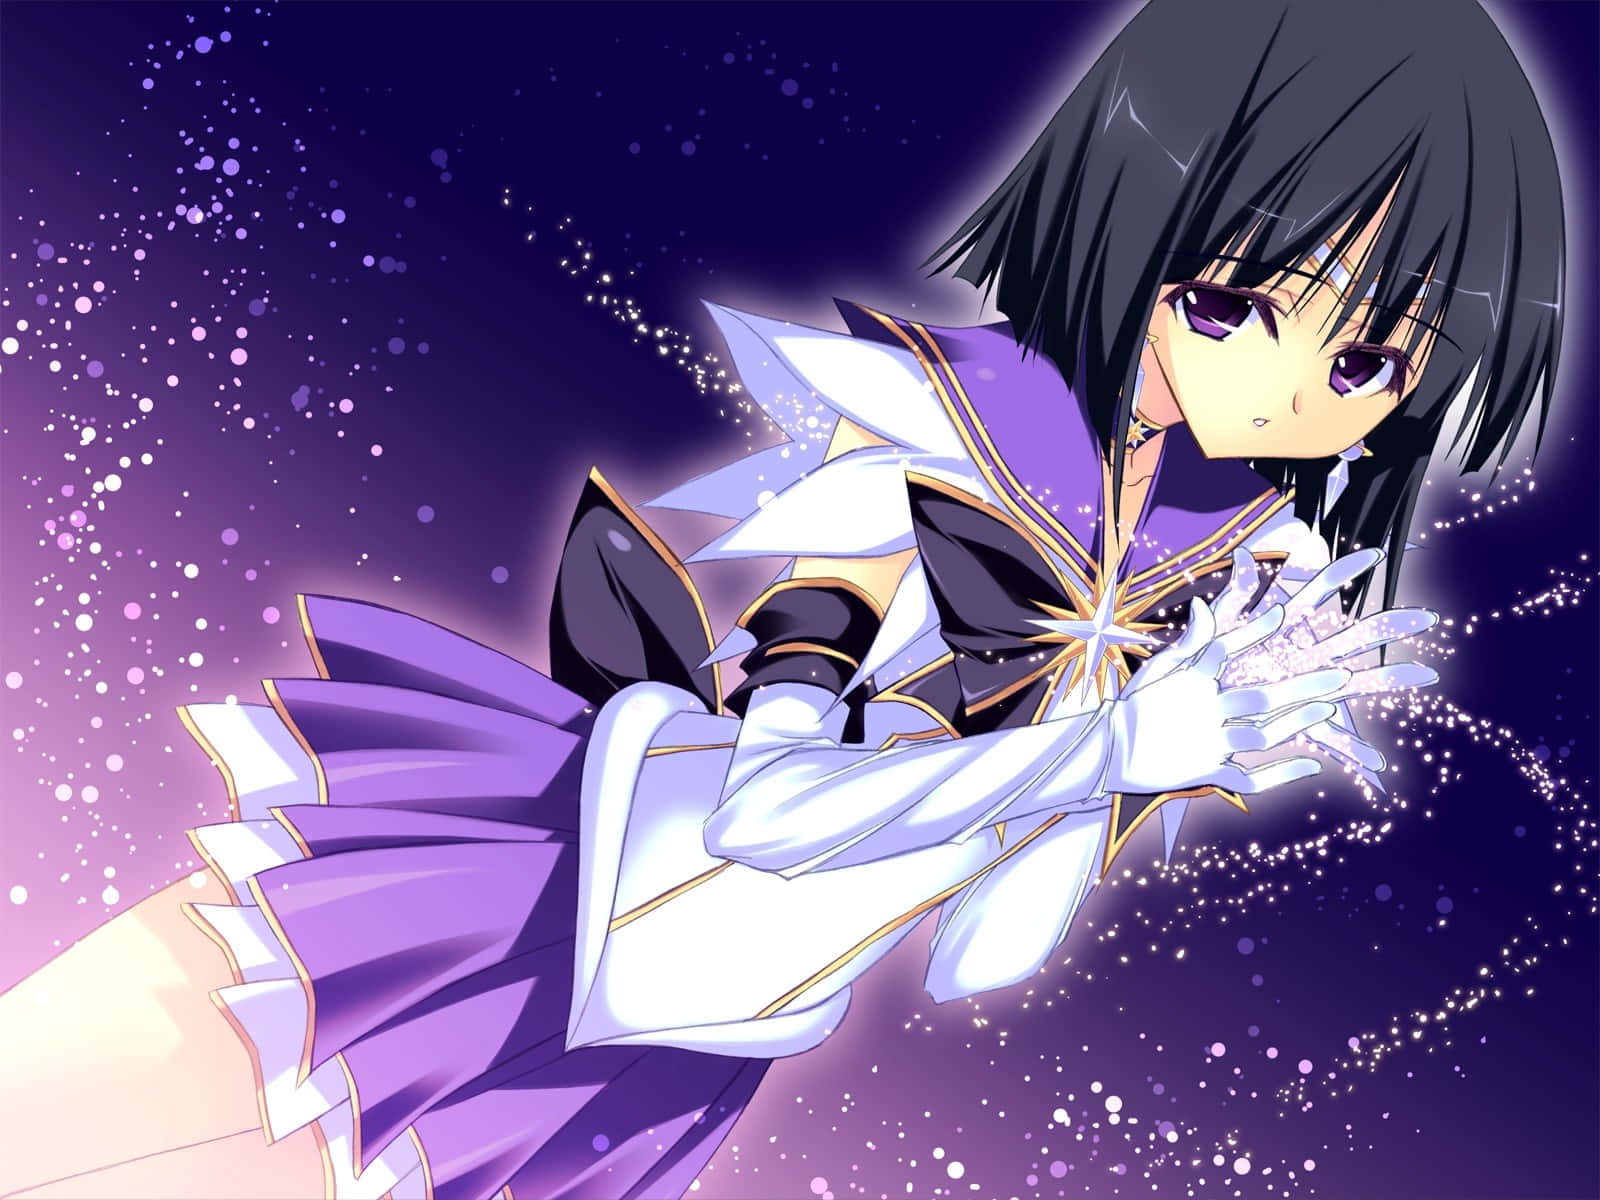 Sailor Saturn from the anime series “Sailor Moon” Wallpaper